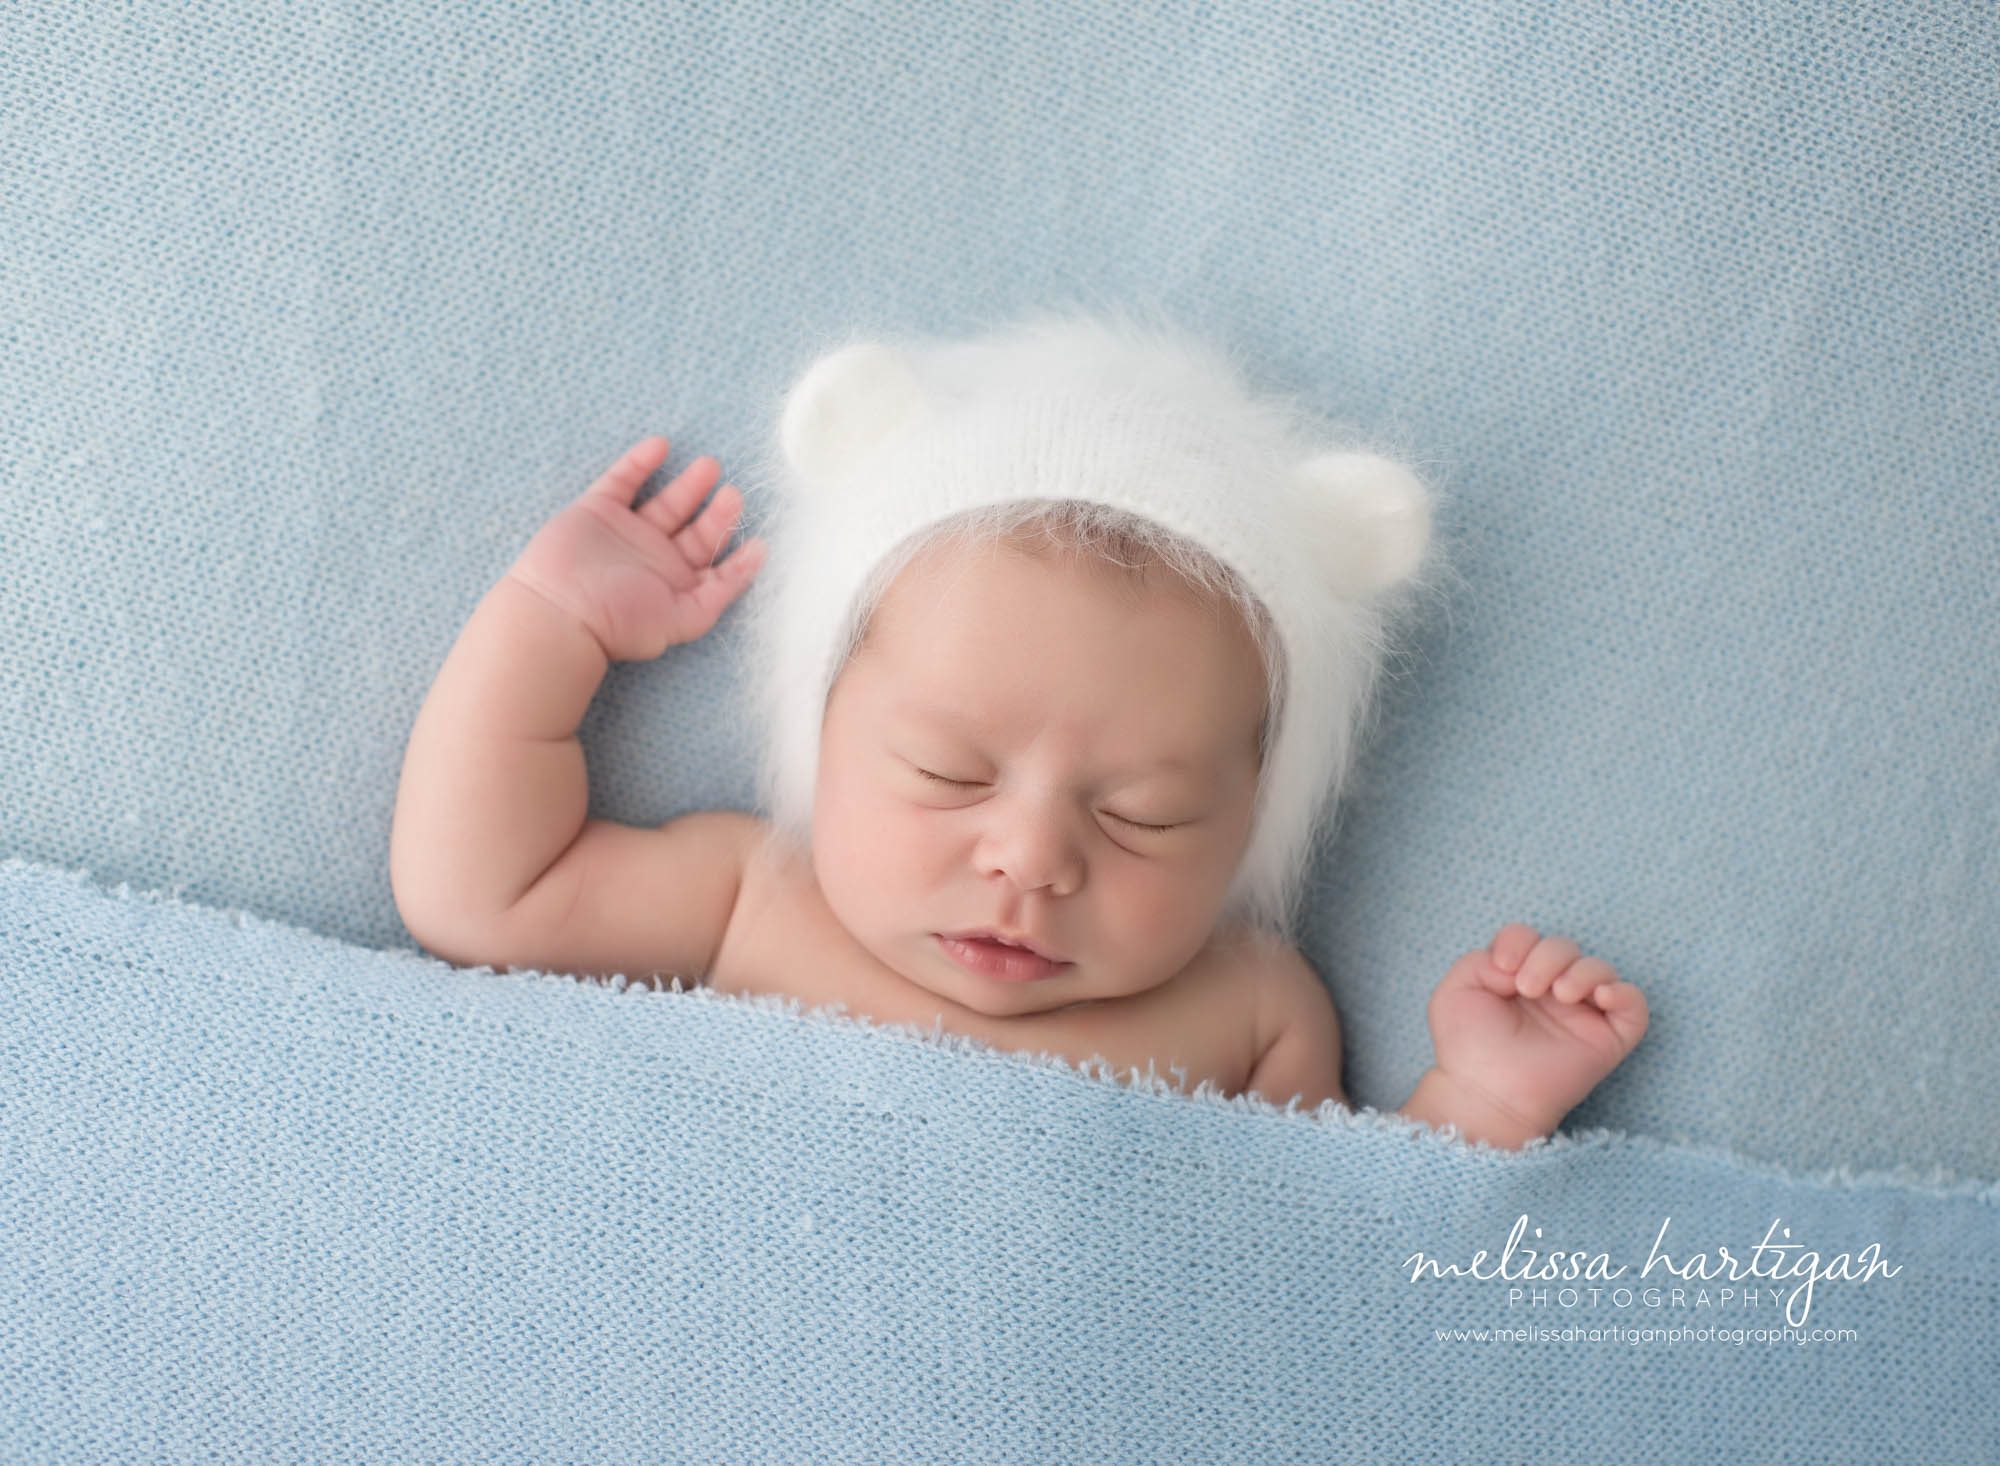 Melissa Hartigan Photography Connecticut Newborn Photographer Coventry Ct Middlefield CT baby Fairfield county Newborn and maternity photography Baby girl bear knit hat sleeping under blue blanket arms out